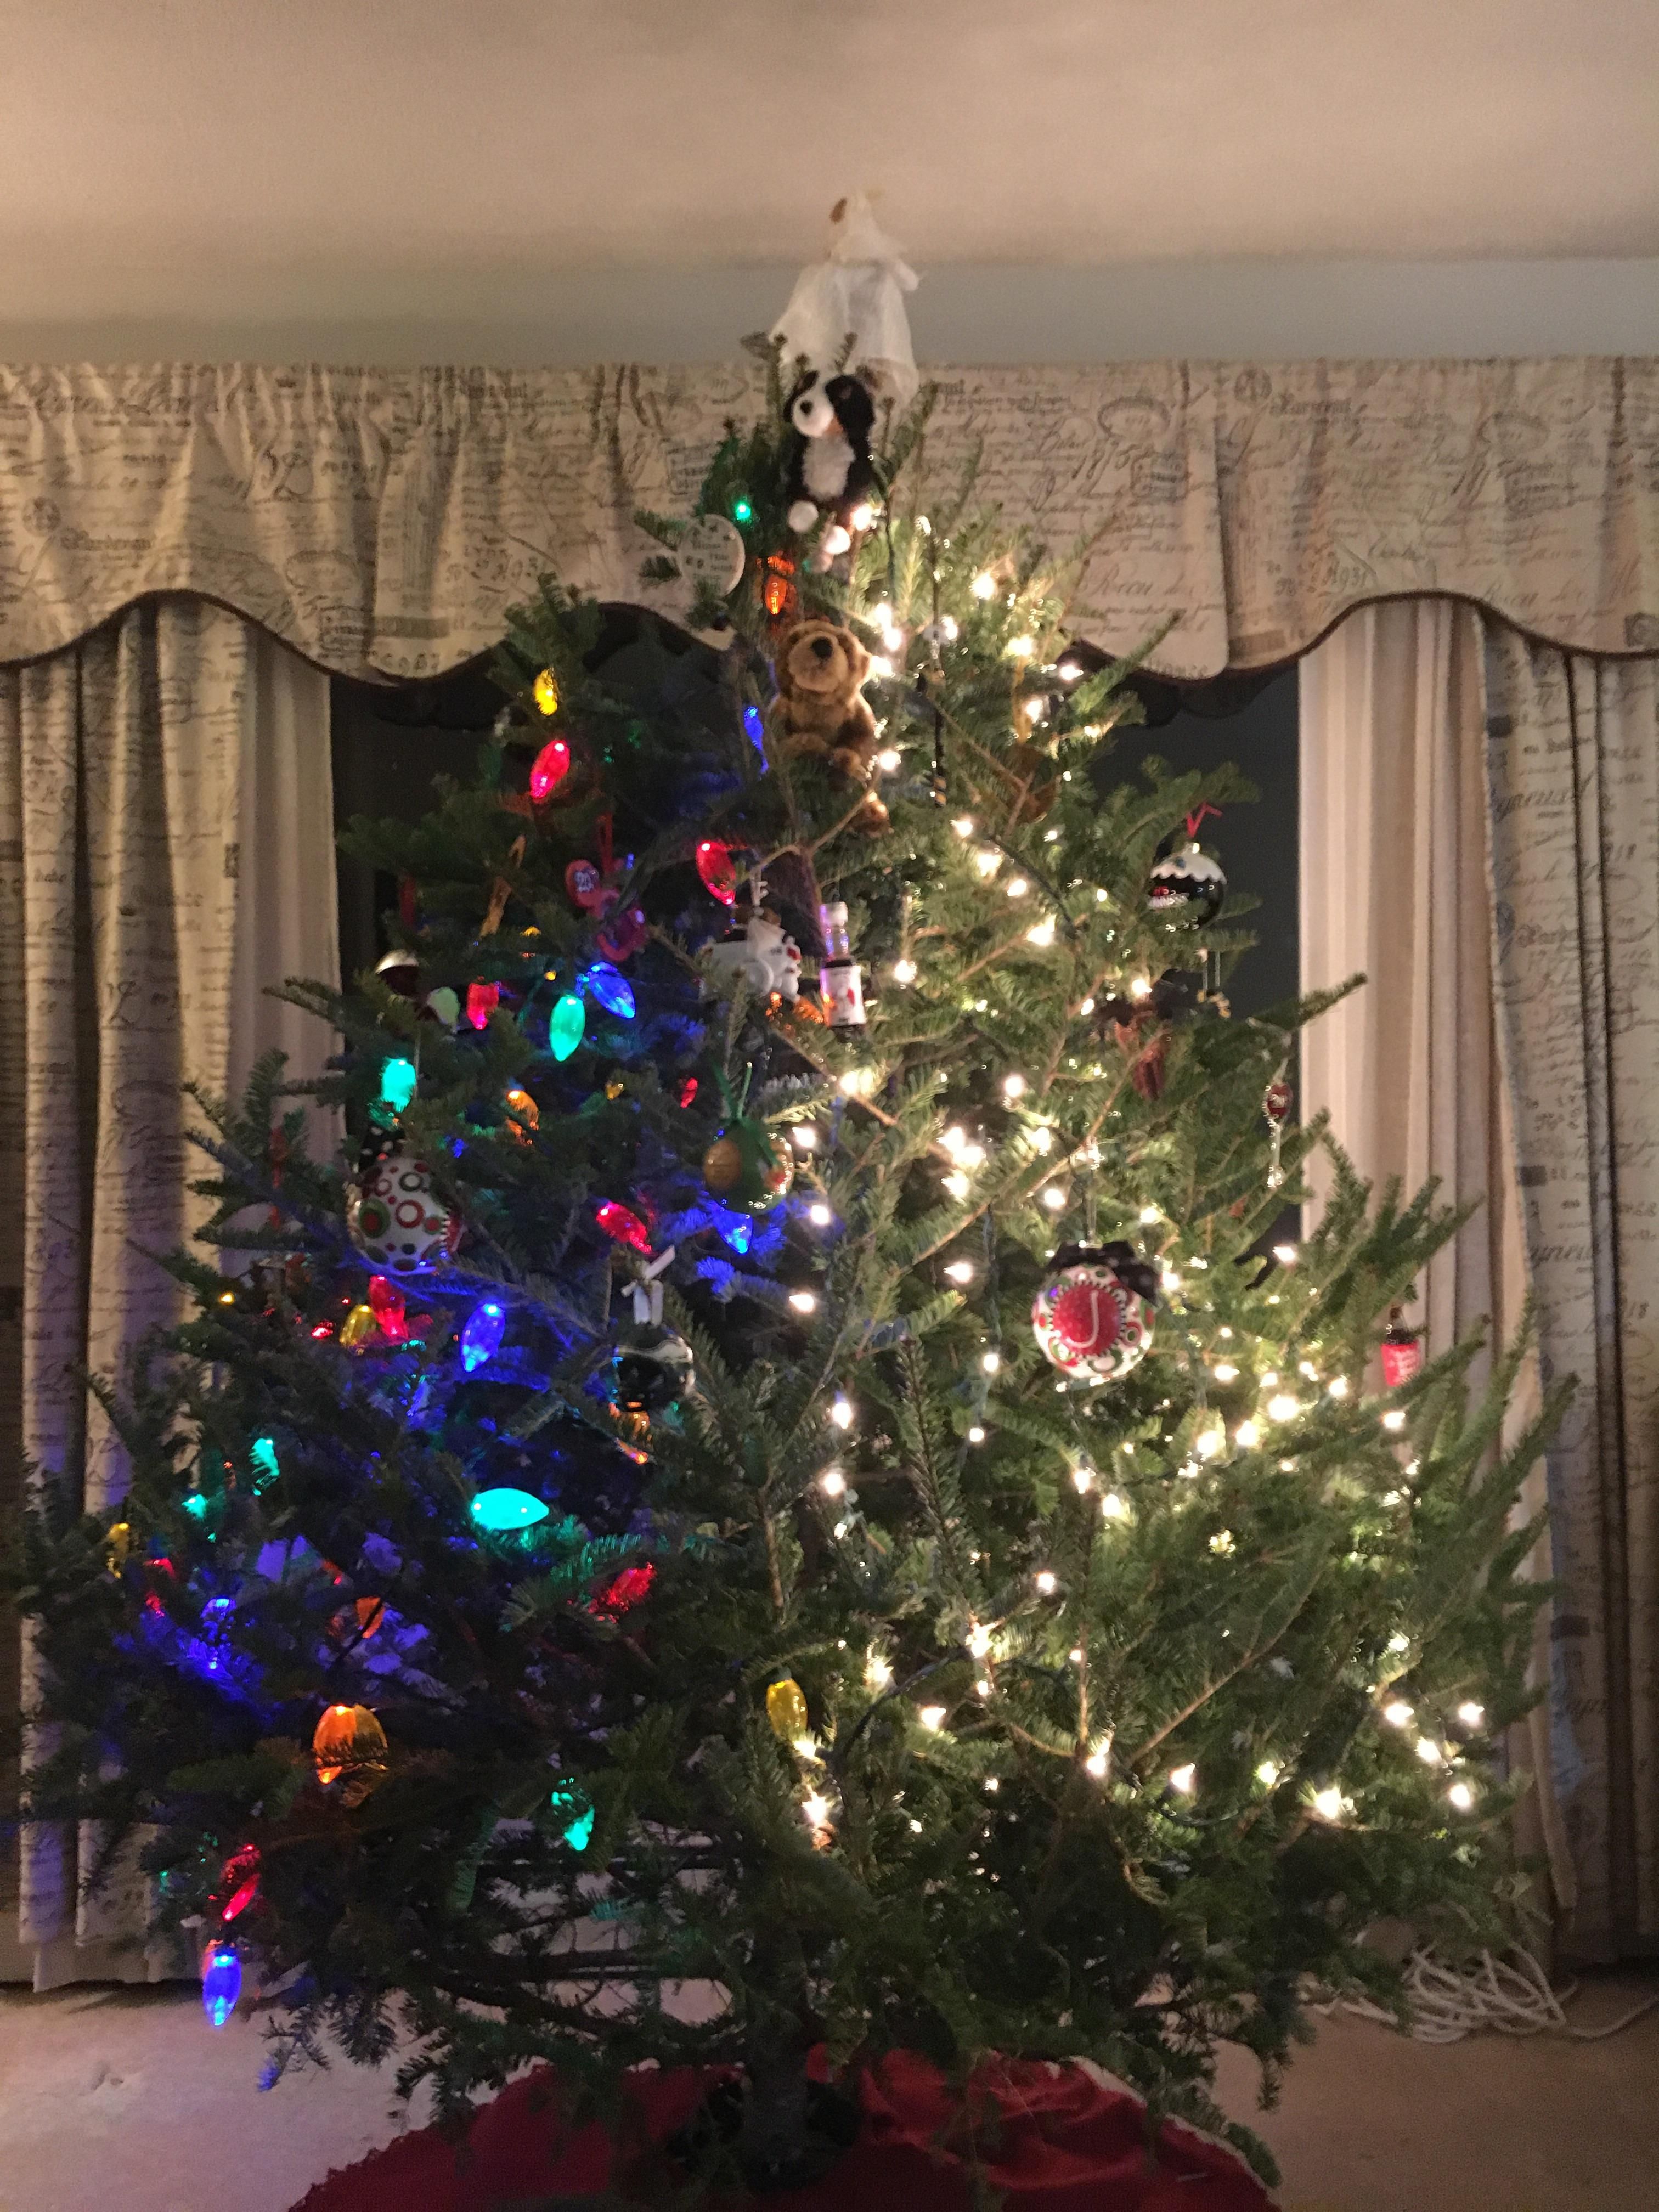 My wife and I don't agree on how to decorate a tree. 4 years ago we started this as a joke and it is still going strong.